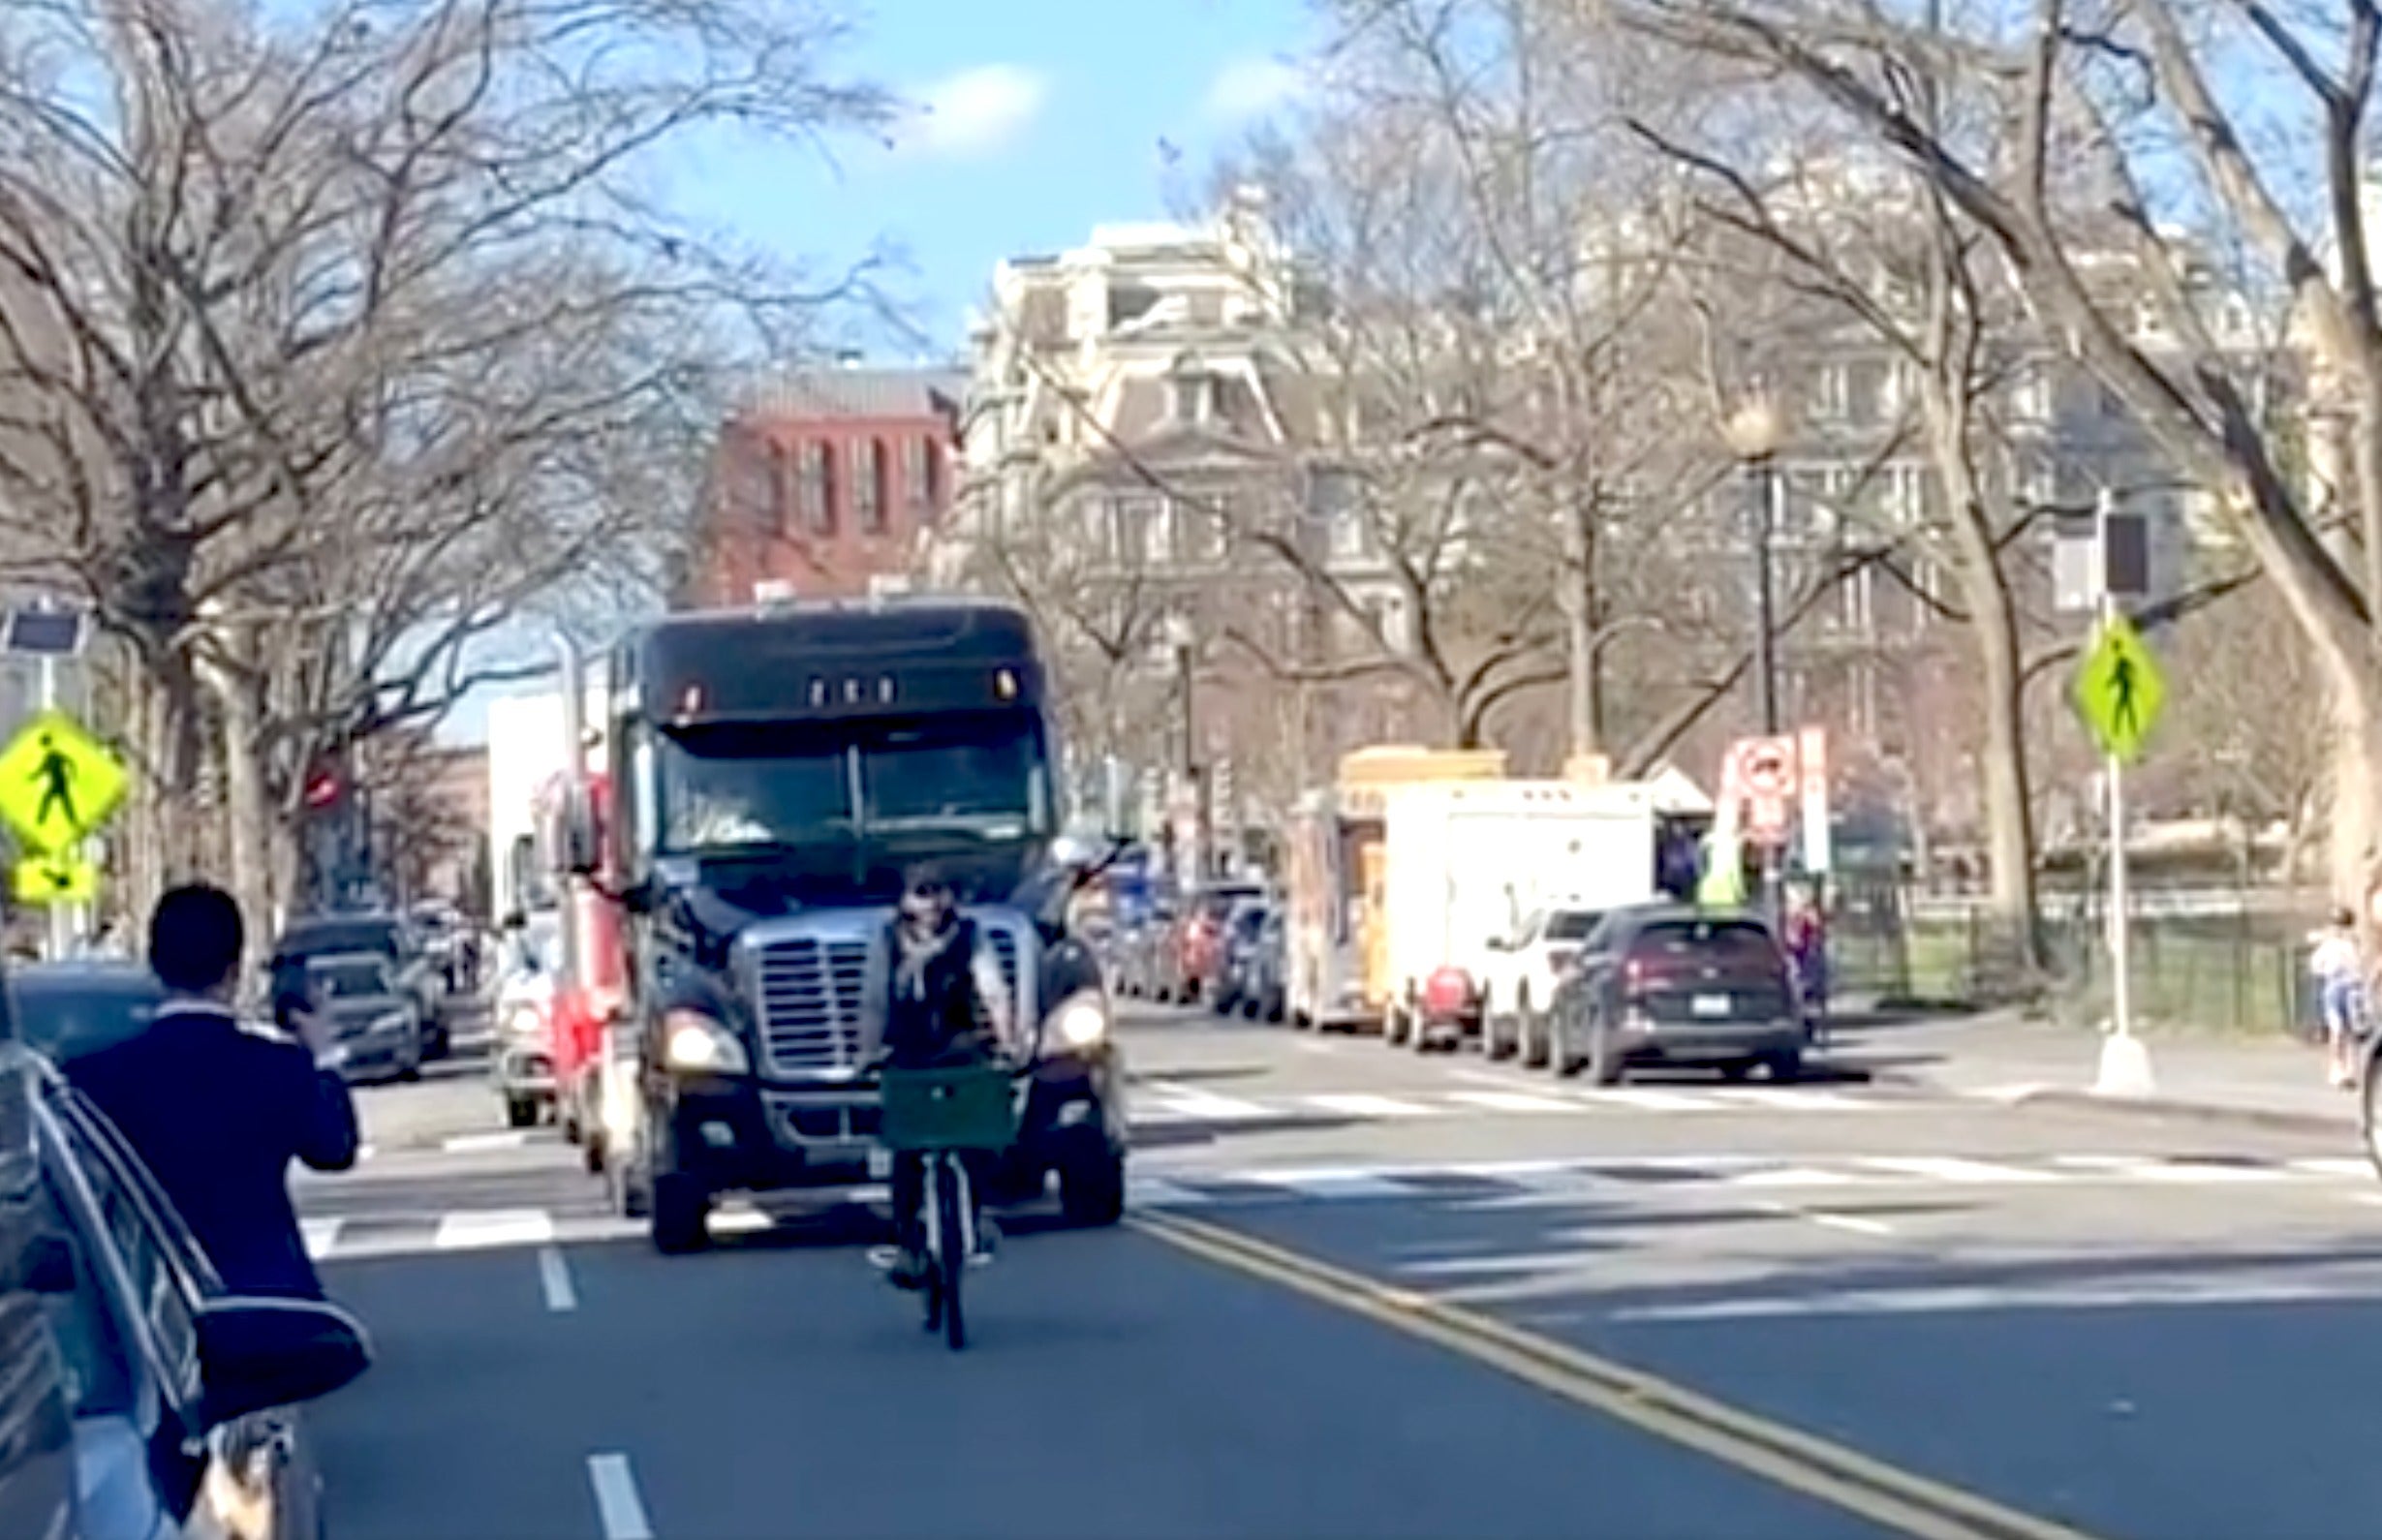 The People’s Convoy trucker protest was reduced to a slow crawl in Washington DC by one man on a bike